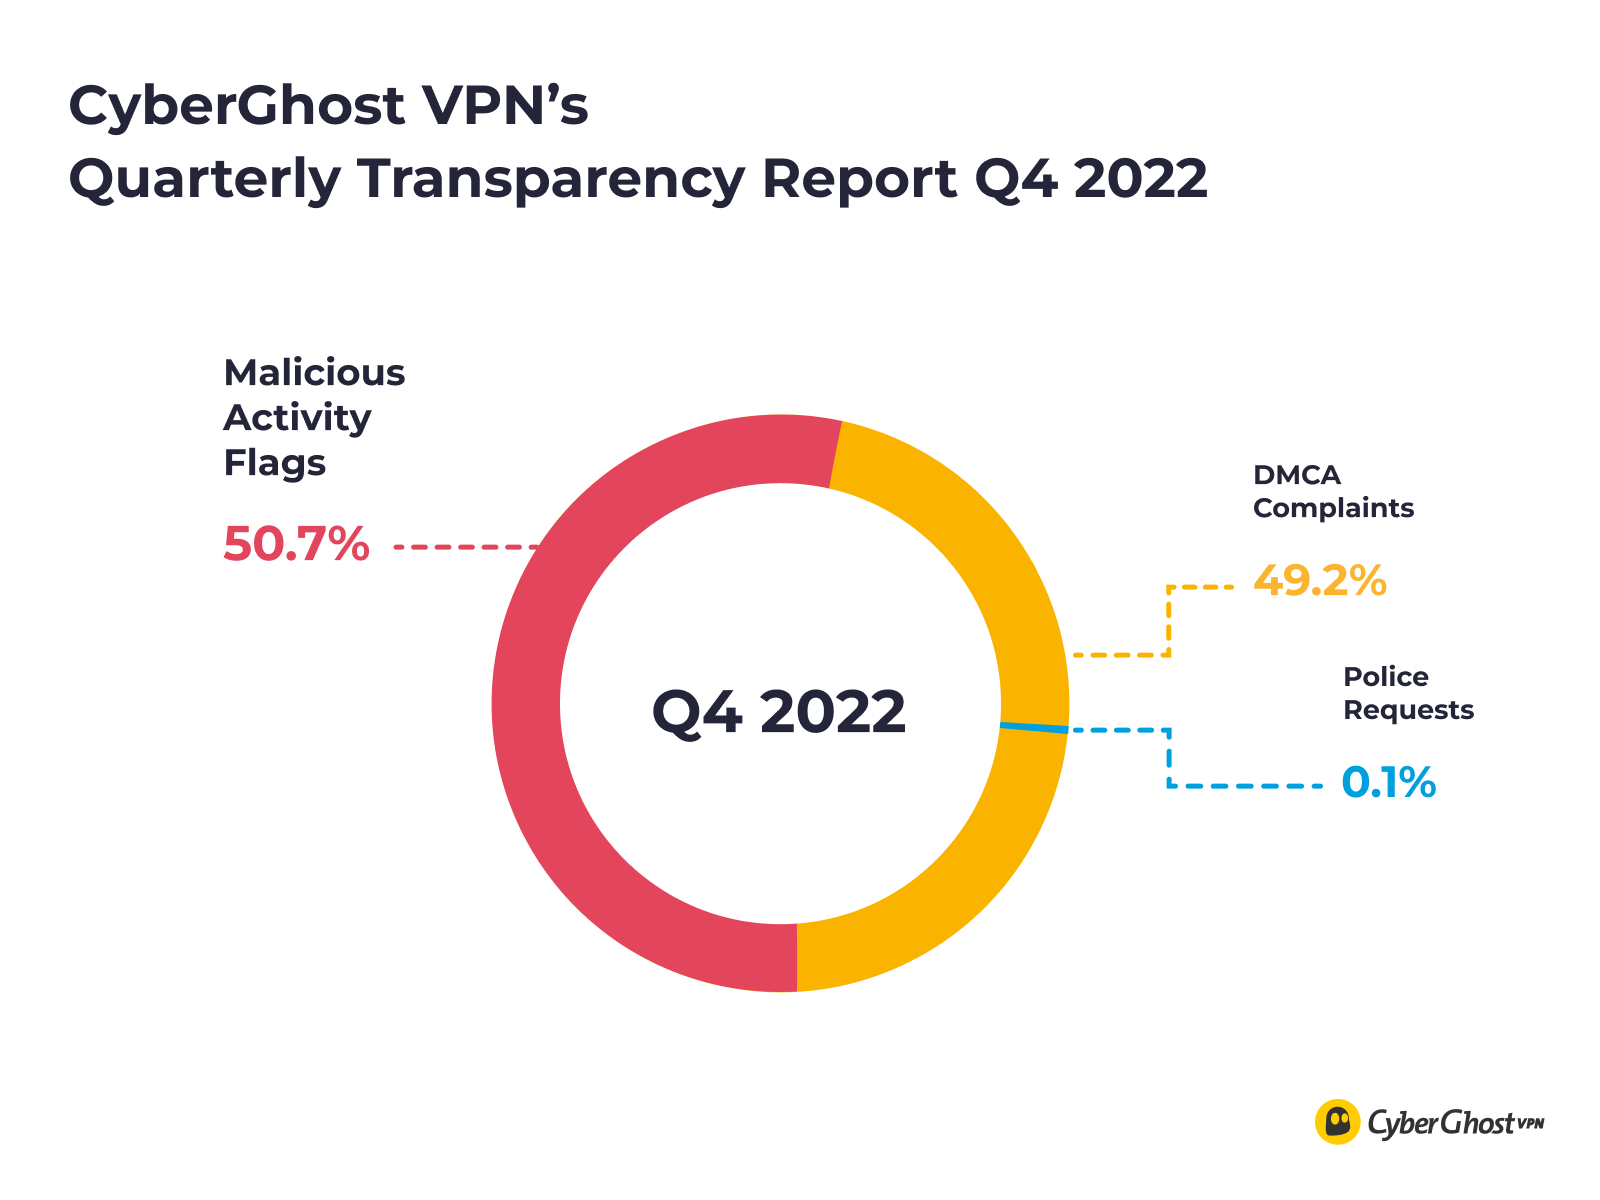 CyberGhost VPN's Quarterly Transparency Report numbers for Q4 2022